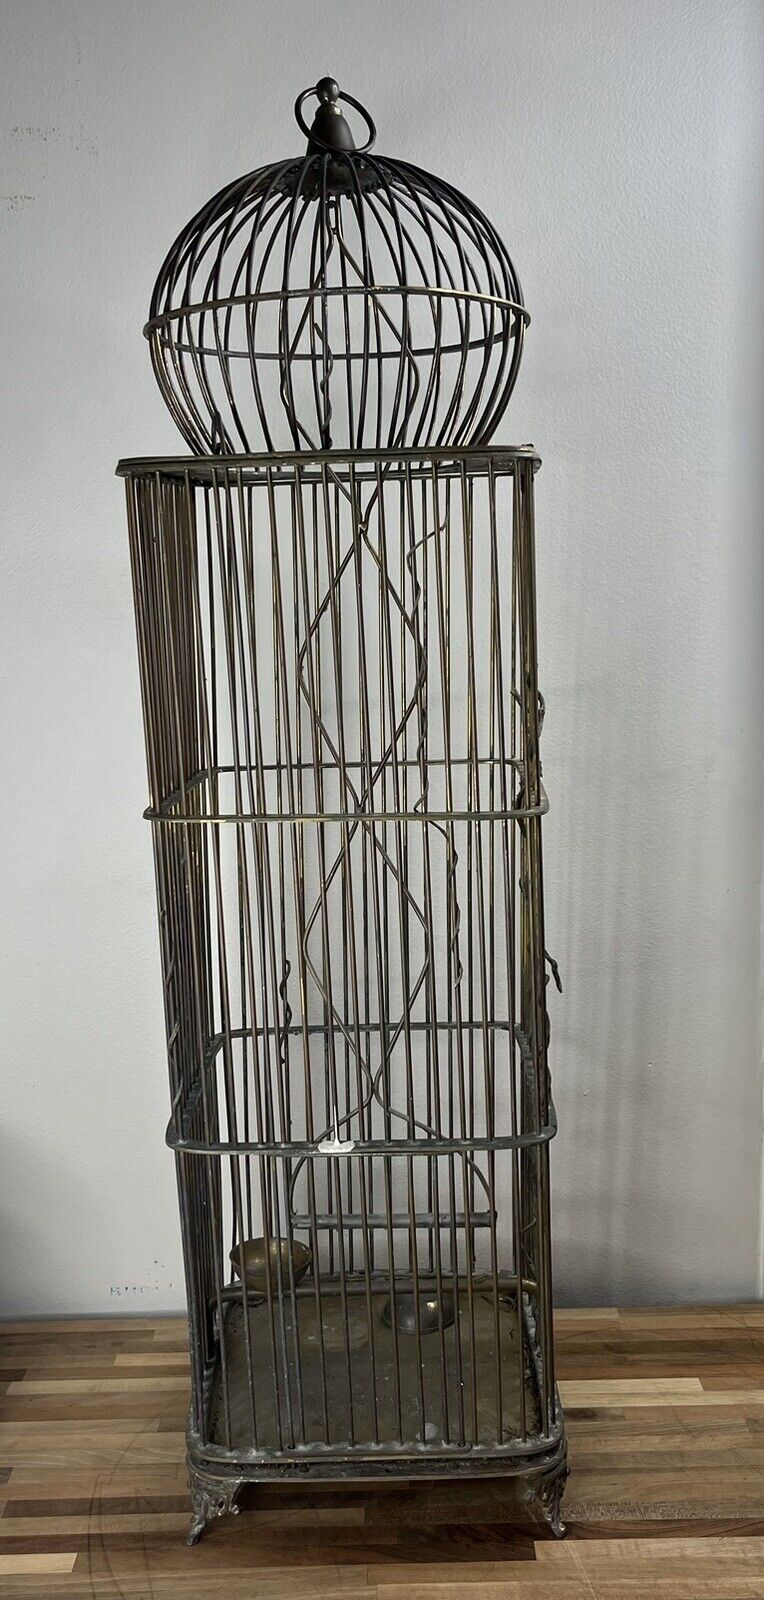 3 foot Hanging Antique Brass Wire Canary Bird Cage Gorgeous w/ Swing, Feed Bowls